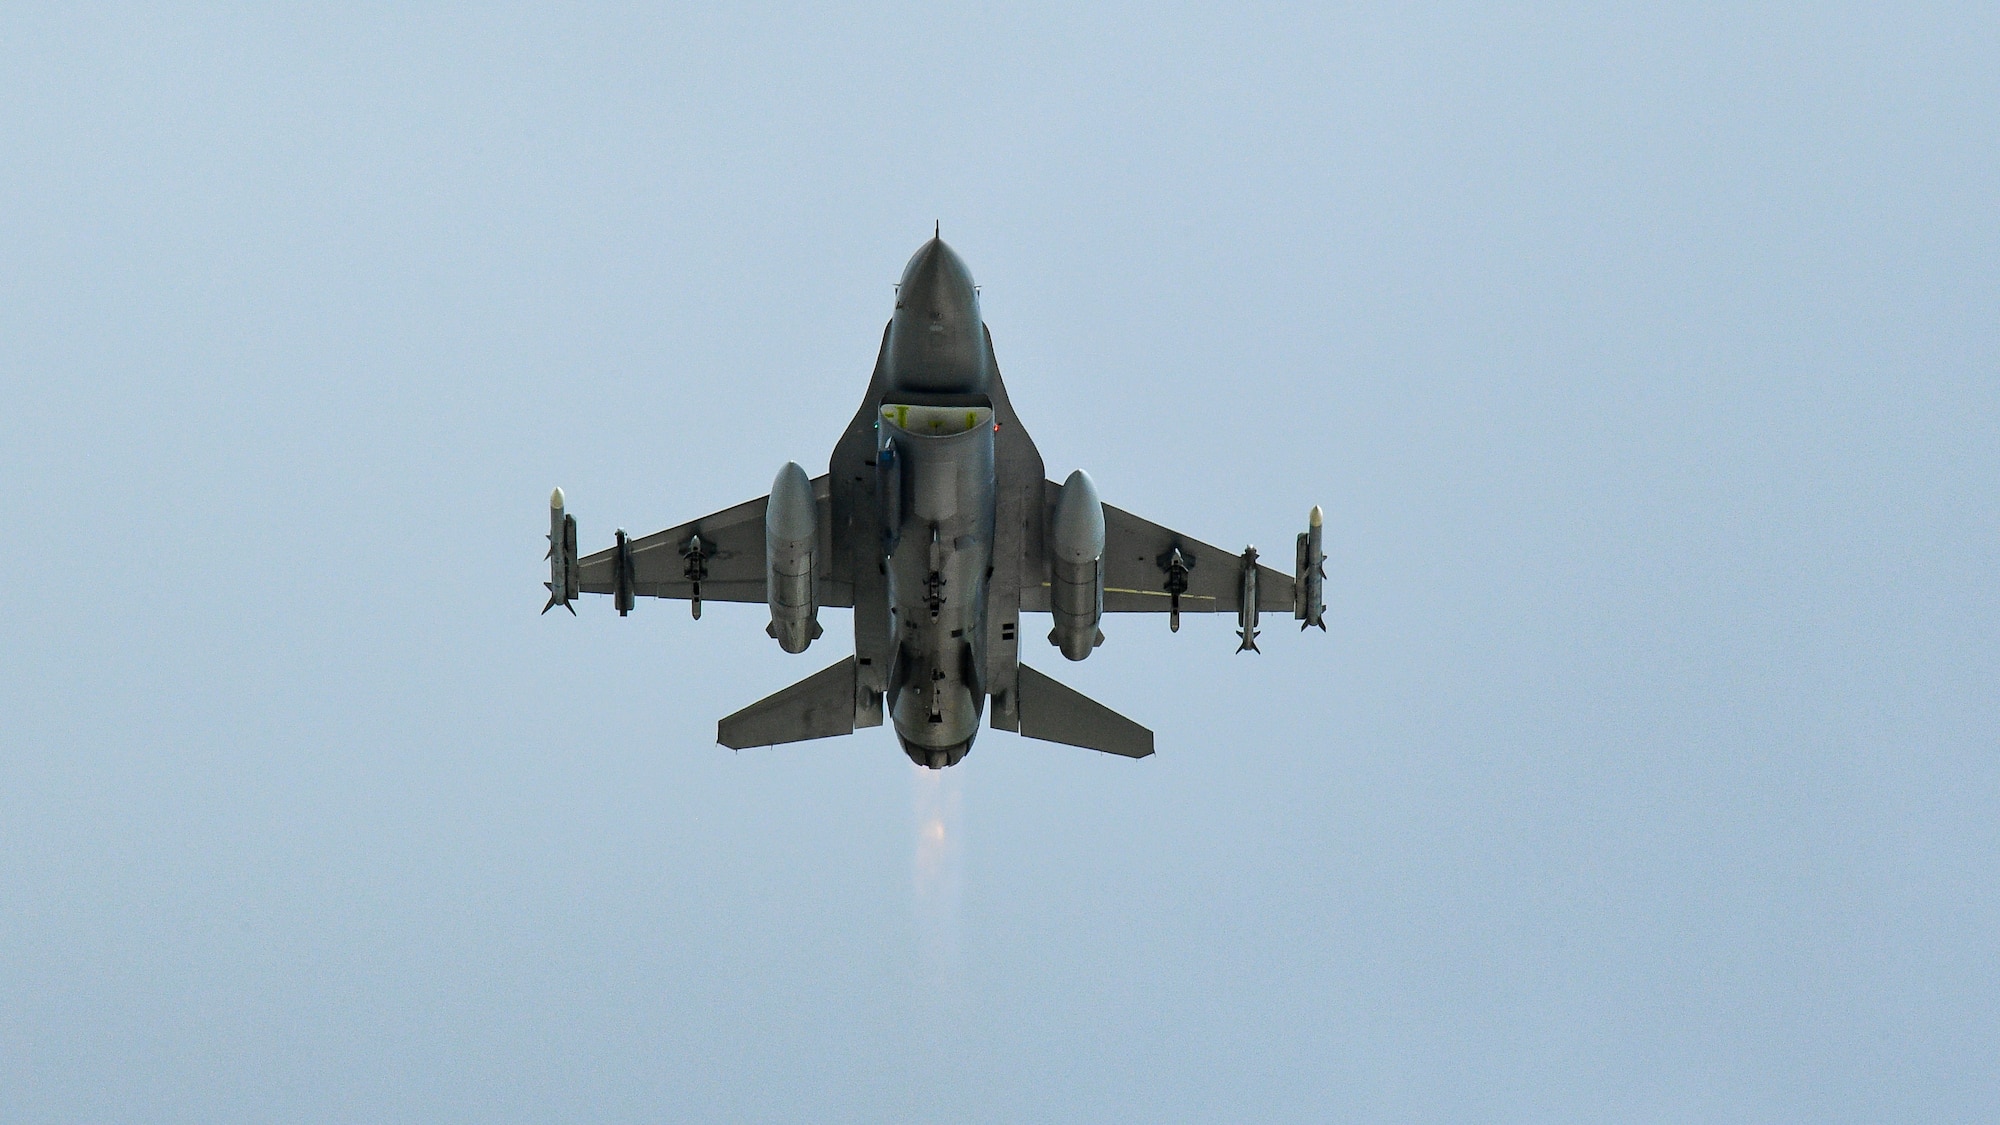 An F-16 takes off during a combat exercise at Hill Air Force Base, Utah, May 1, 2019. The active duty 388th Fighter Wing and Reserve 419th Fighter Wing, along with F-16 units from Holloman AFB, New Mexico, and Kunsan Air Base, Korea, conducted an integrated combat exercise where maintainers were tasked to continually provide ready aircraft and pilots took off in waves to simulate a large force engagement with enemy aircraft. (U.S. Air Force photo by R. Nial Bradshaw)